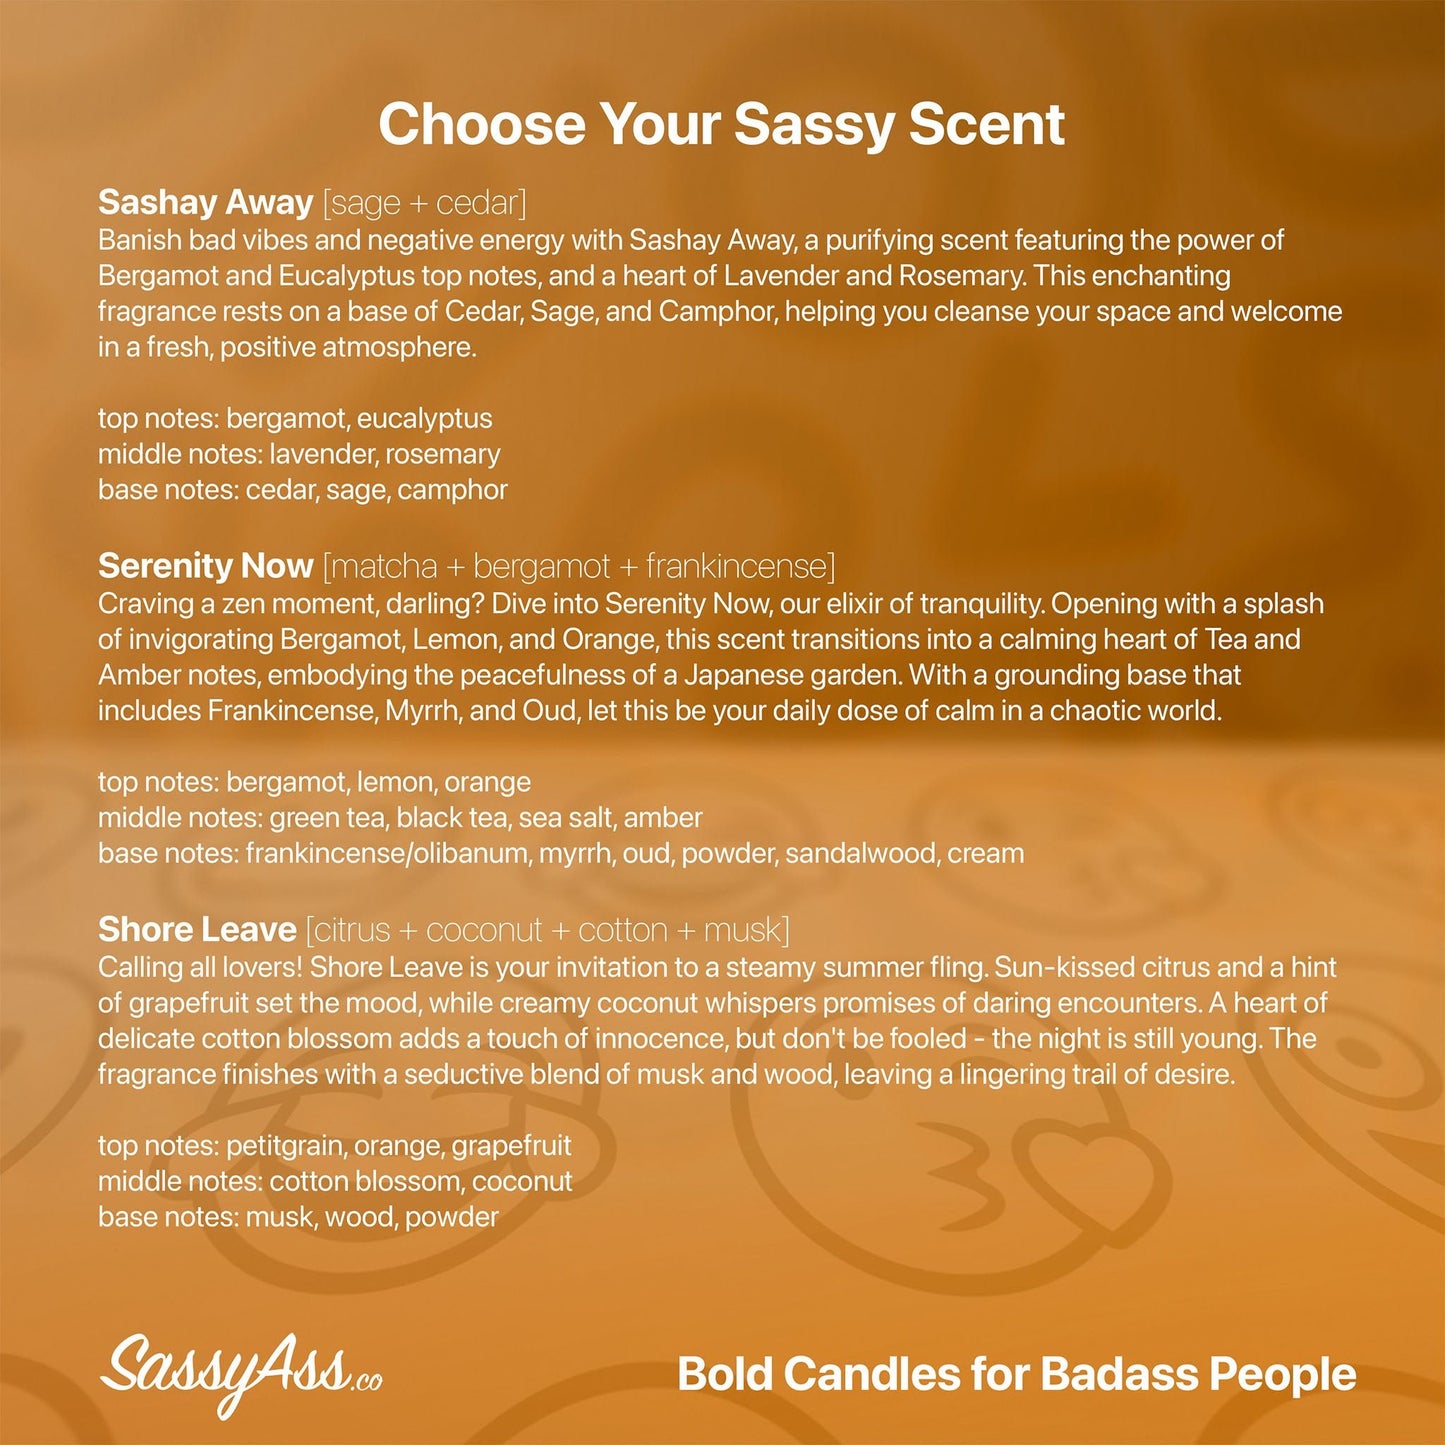 Live Laugh Cunt - Scented Soy Candle: Add Some Sass to Your Space with our Handcrafted, Vegan, Cruelty-Free, and Eco-friendly Candle - a flyer with a picture of a woman's face - SassyAss.co